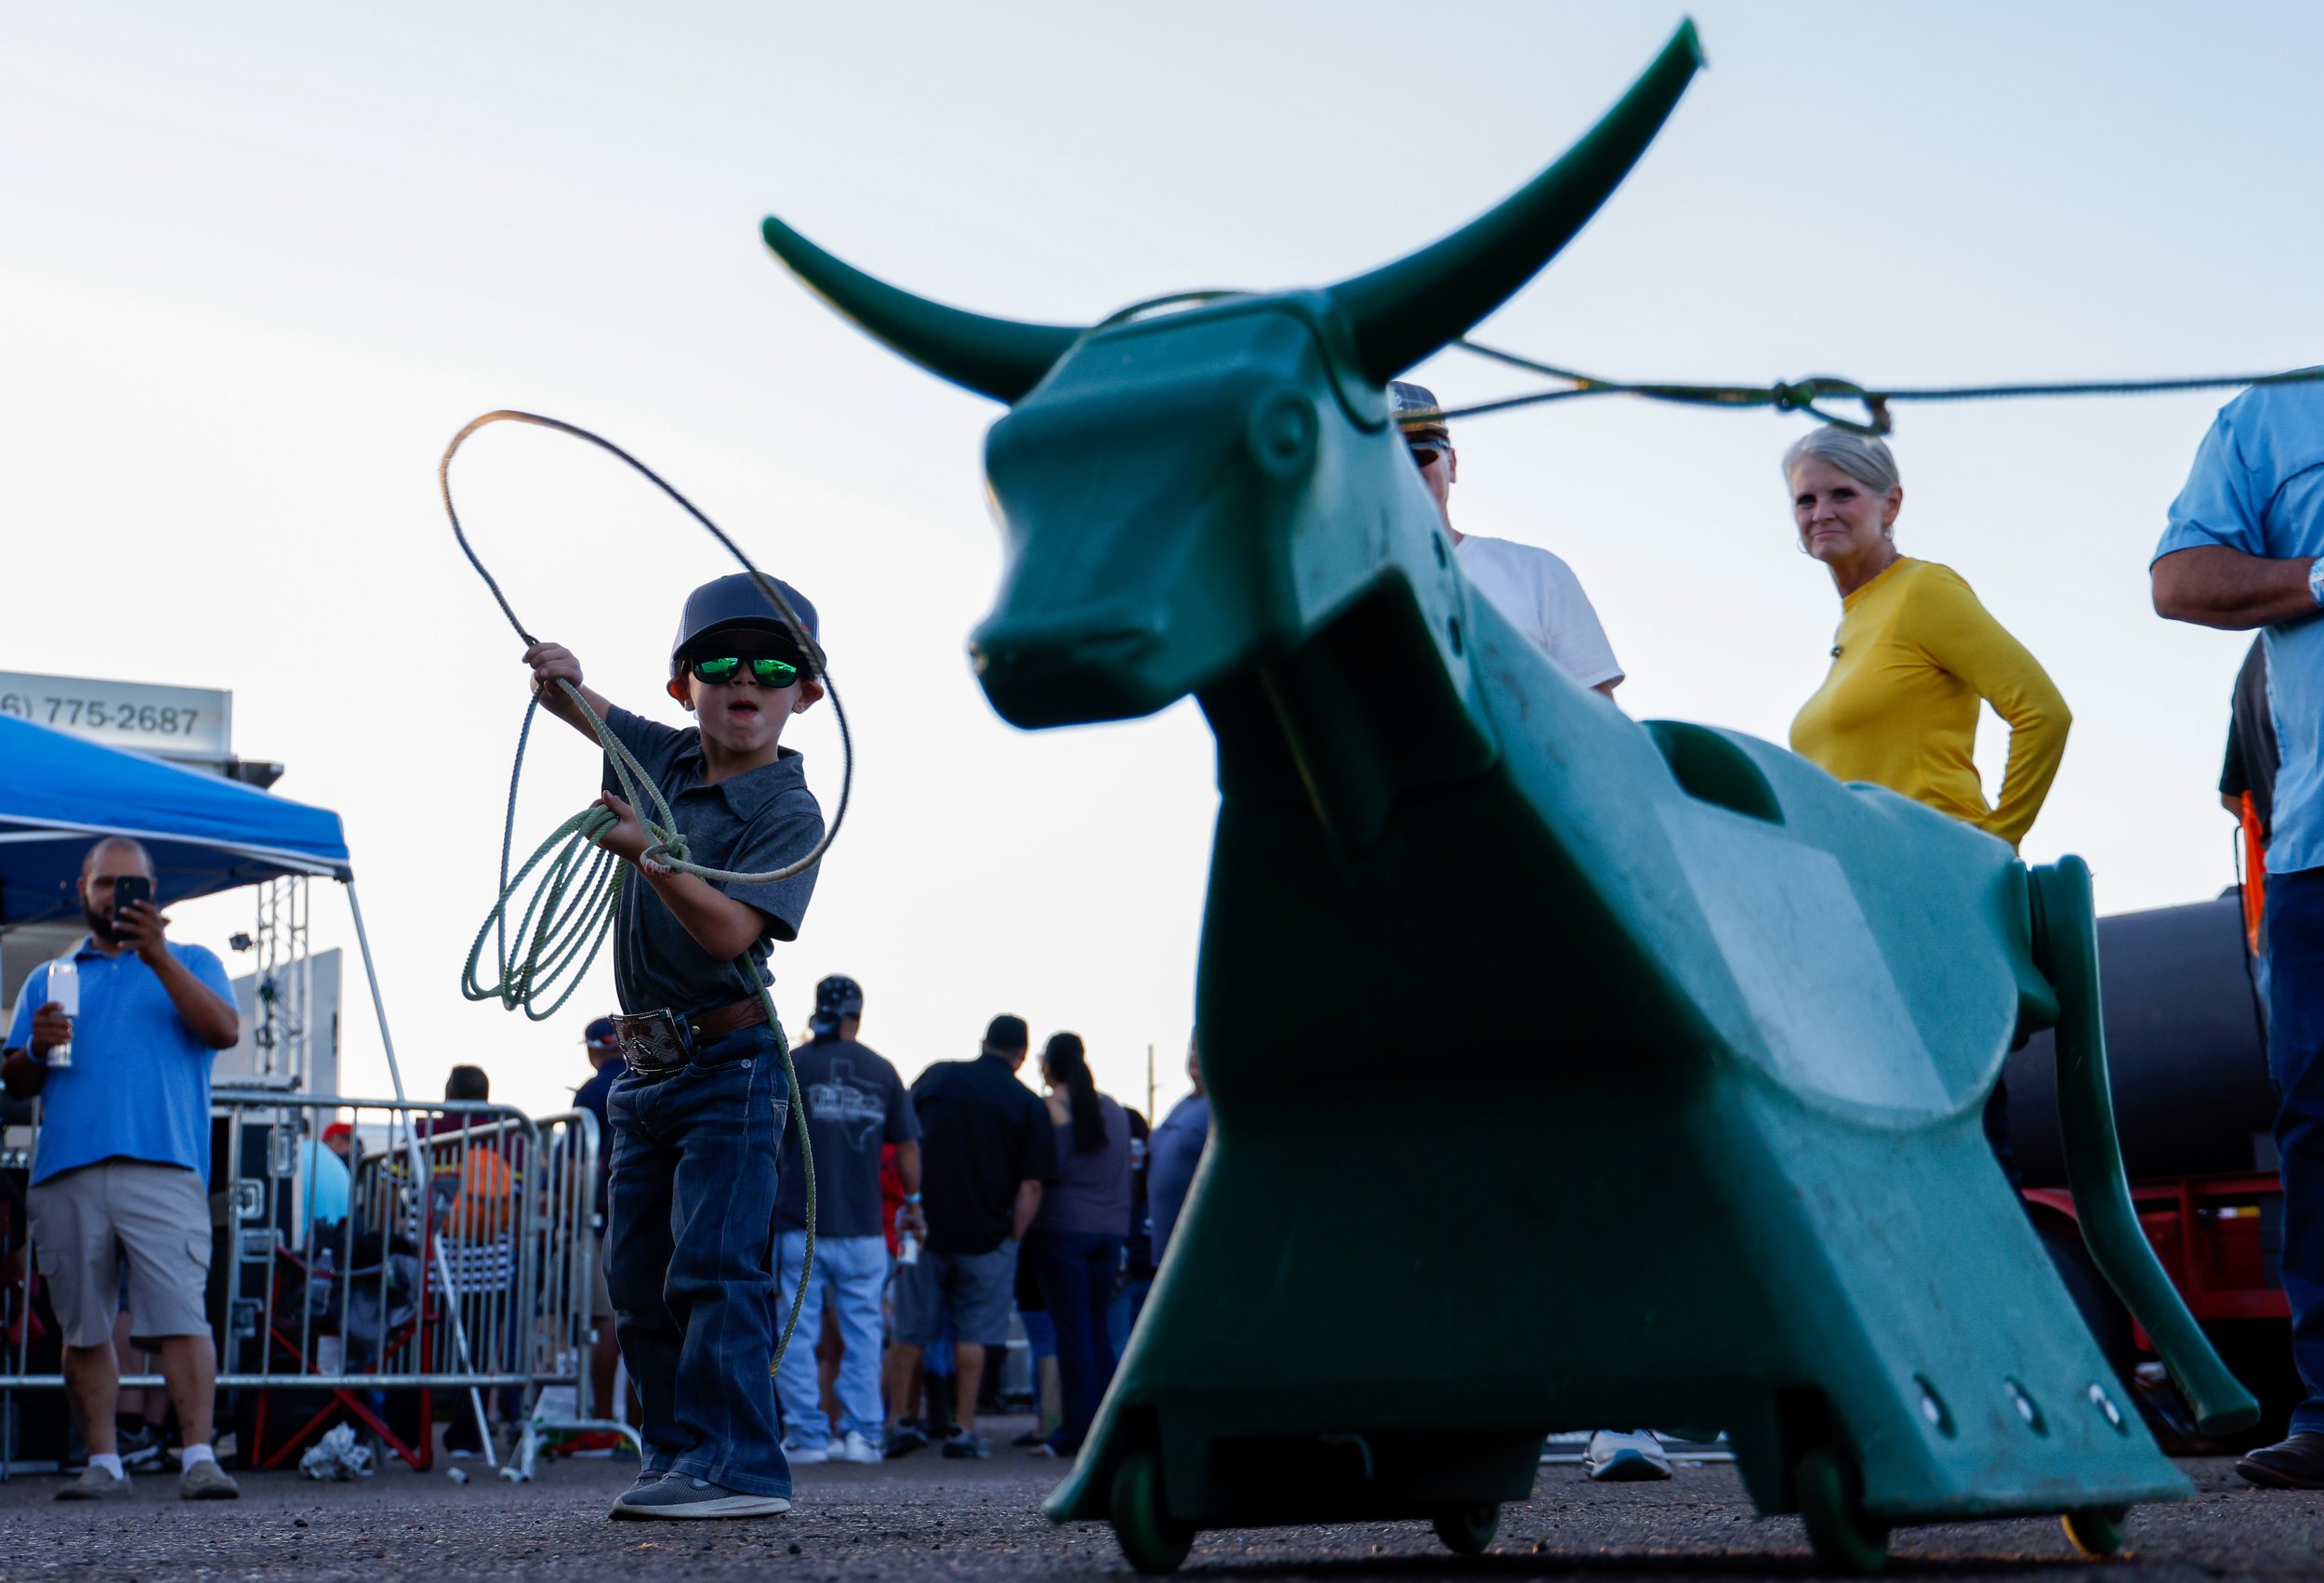  Bodee Burris ropes a dummy during the Hub City BBQ Fest on Thursday, Oct. 14, 2021 at the South Plains Fairgrounds in Lubbock, Texas. 